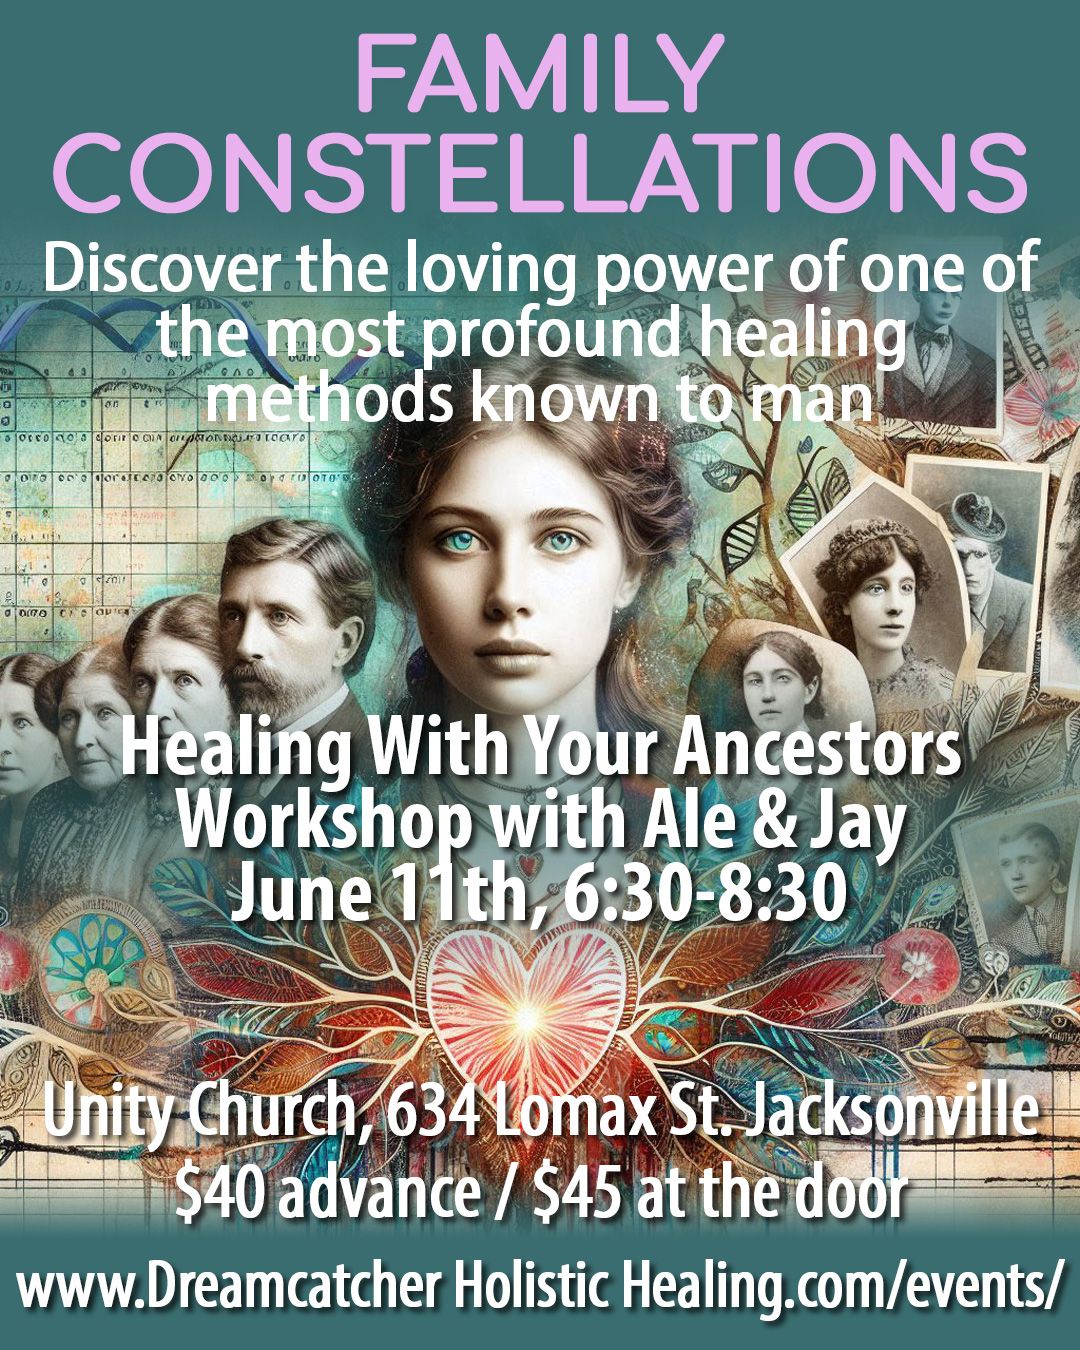 Family Constellations Workshop